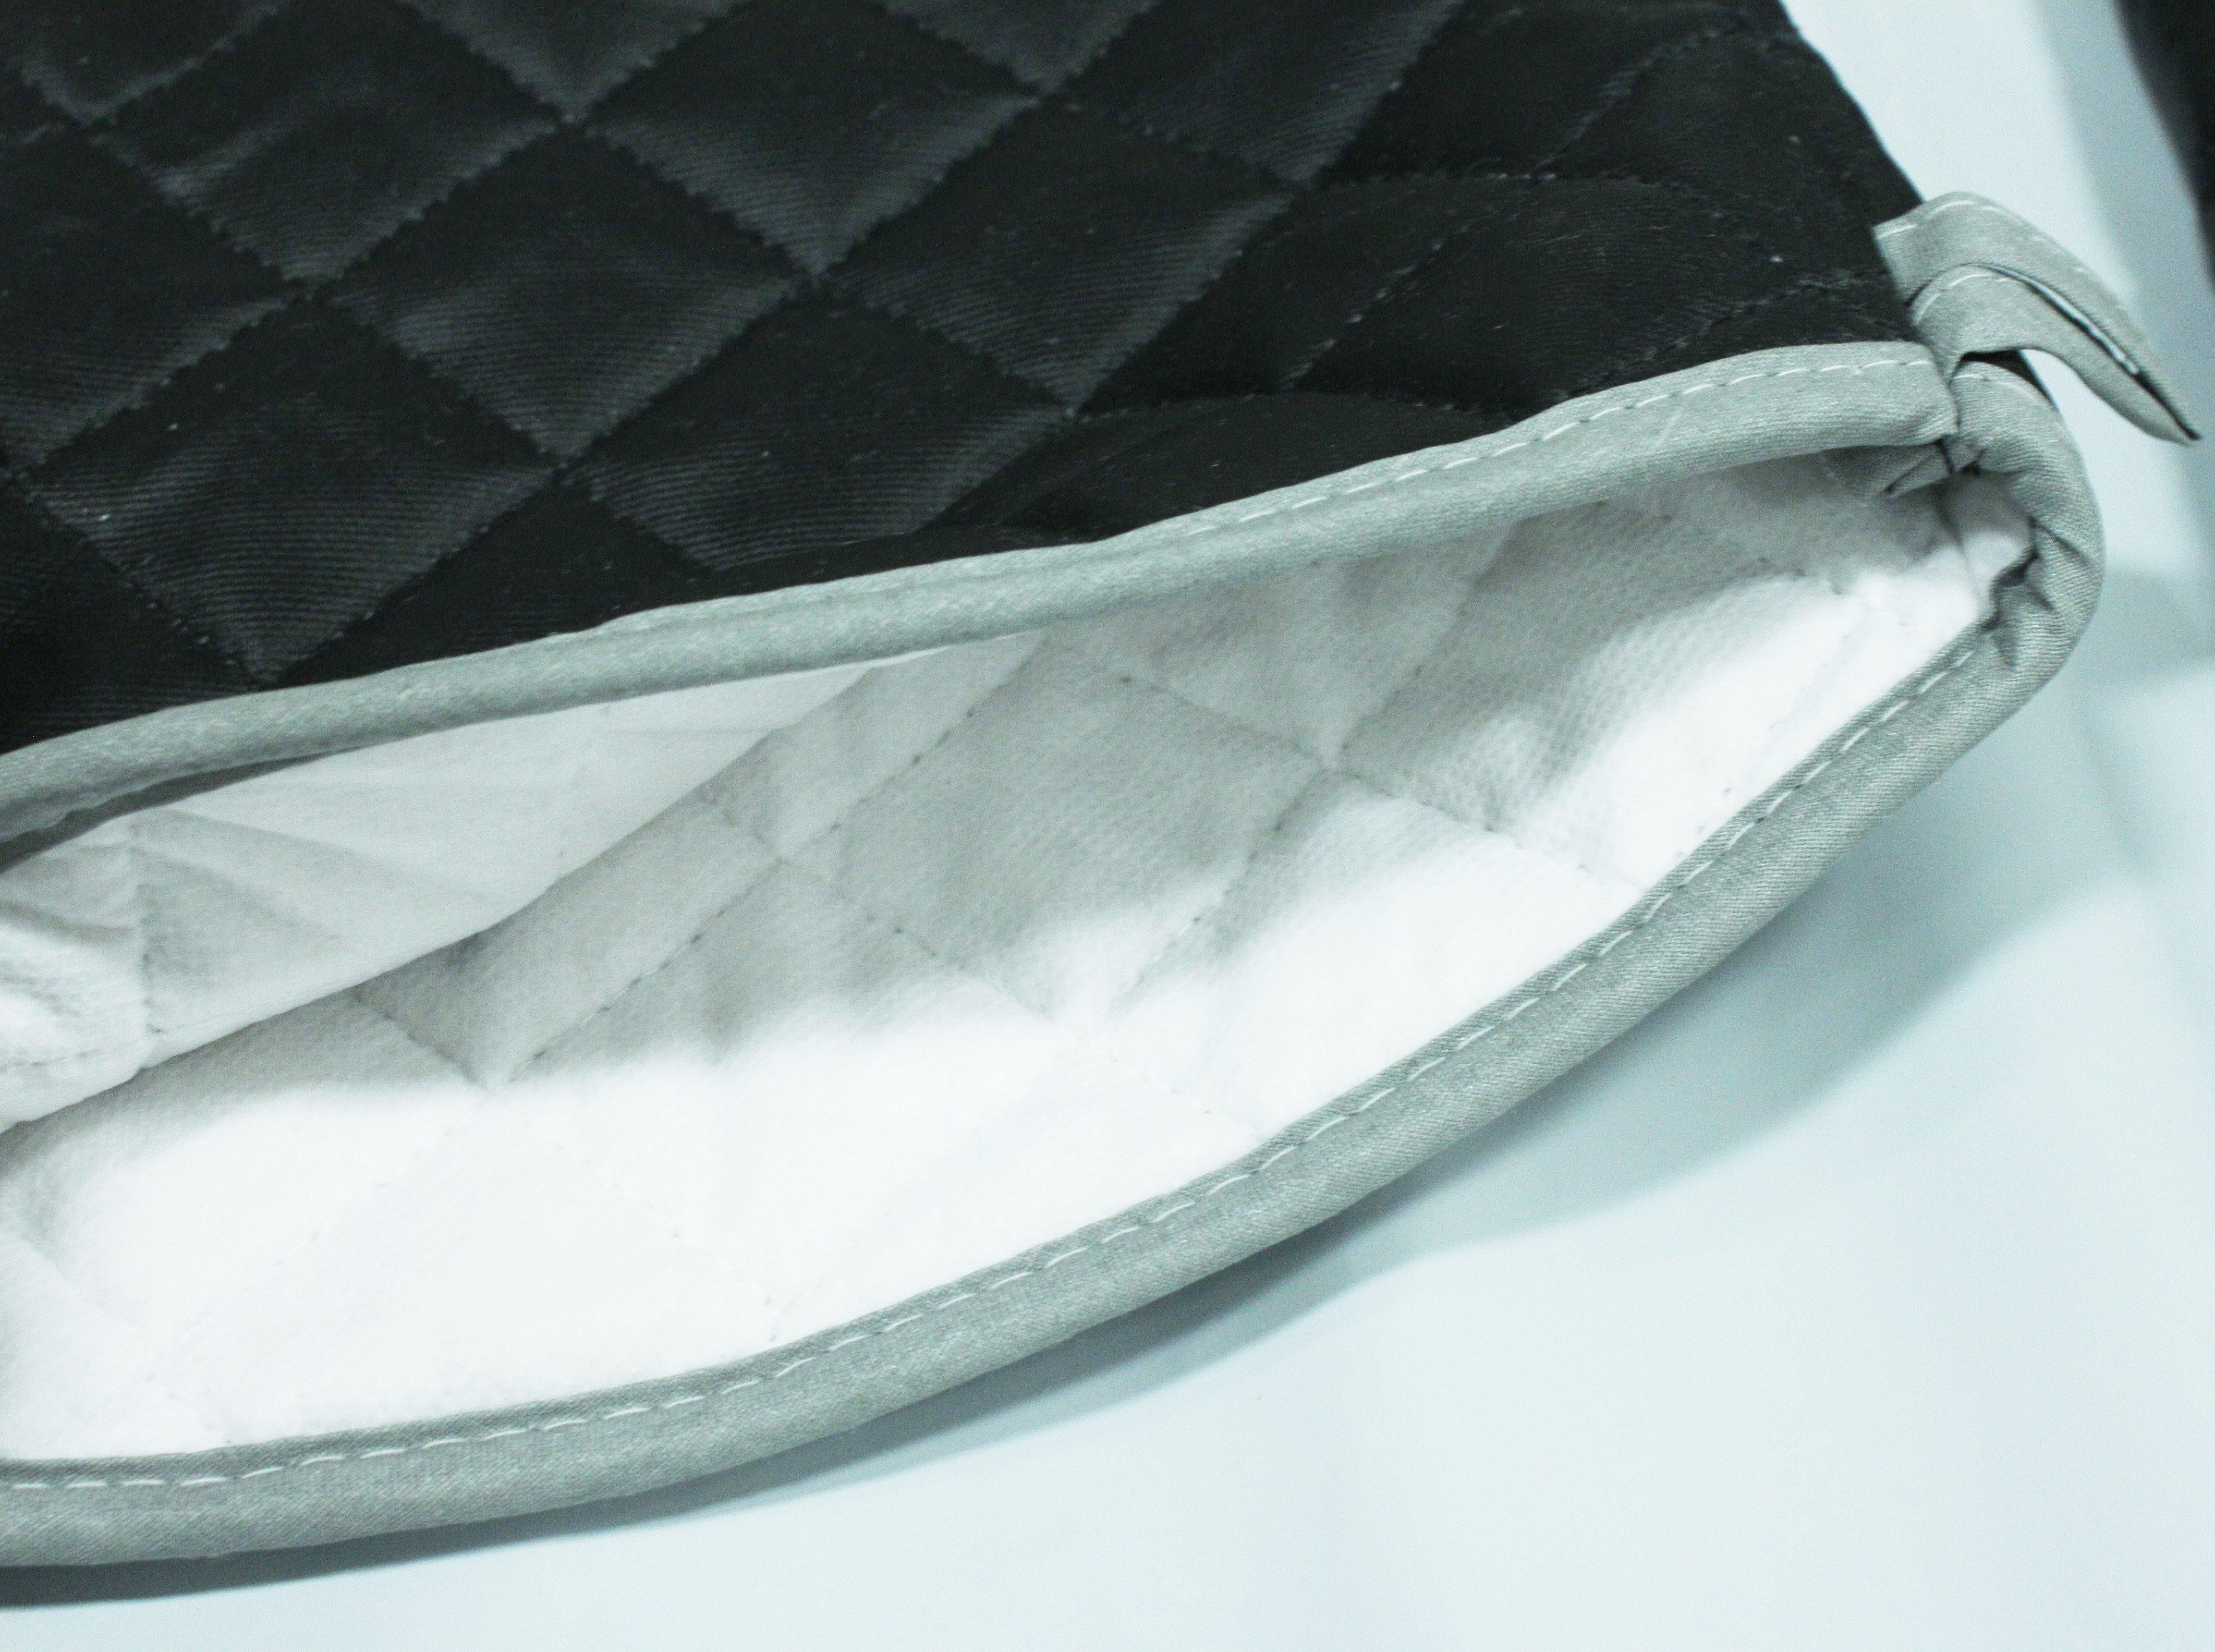 24 Black Quilted Canvas Oven Mitts, 450 Degree Heat Resistance